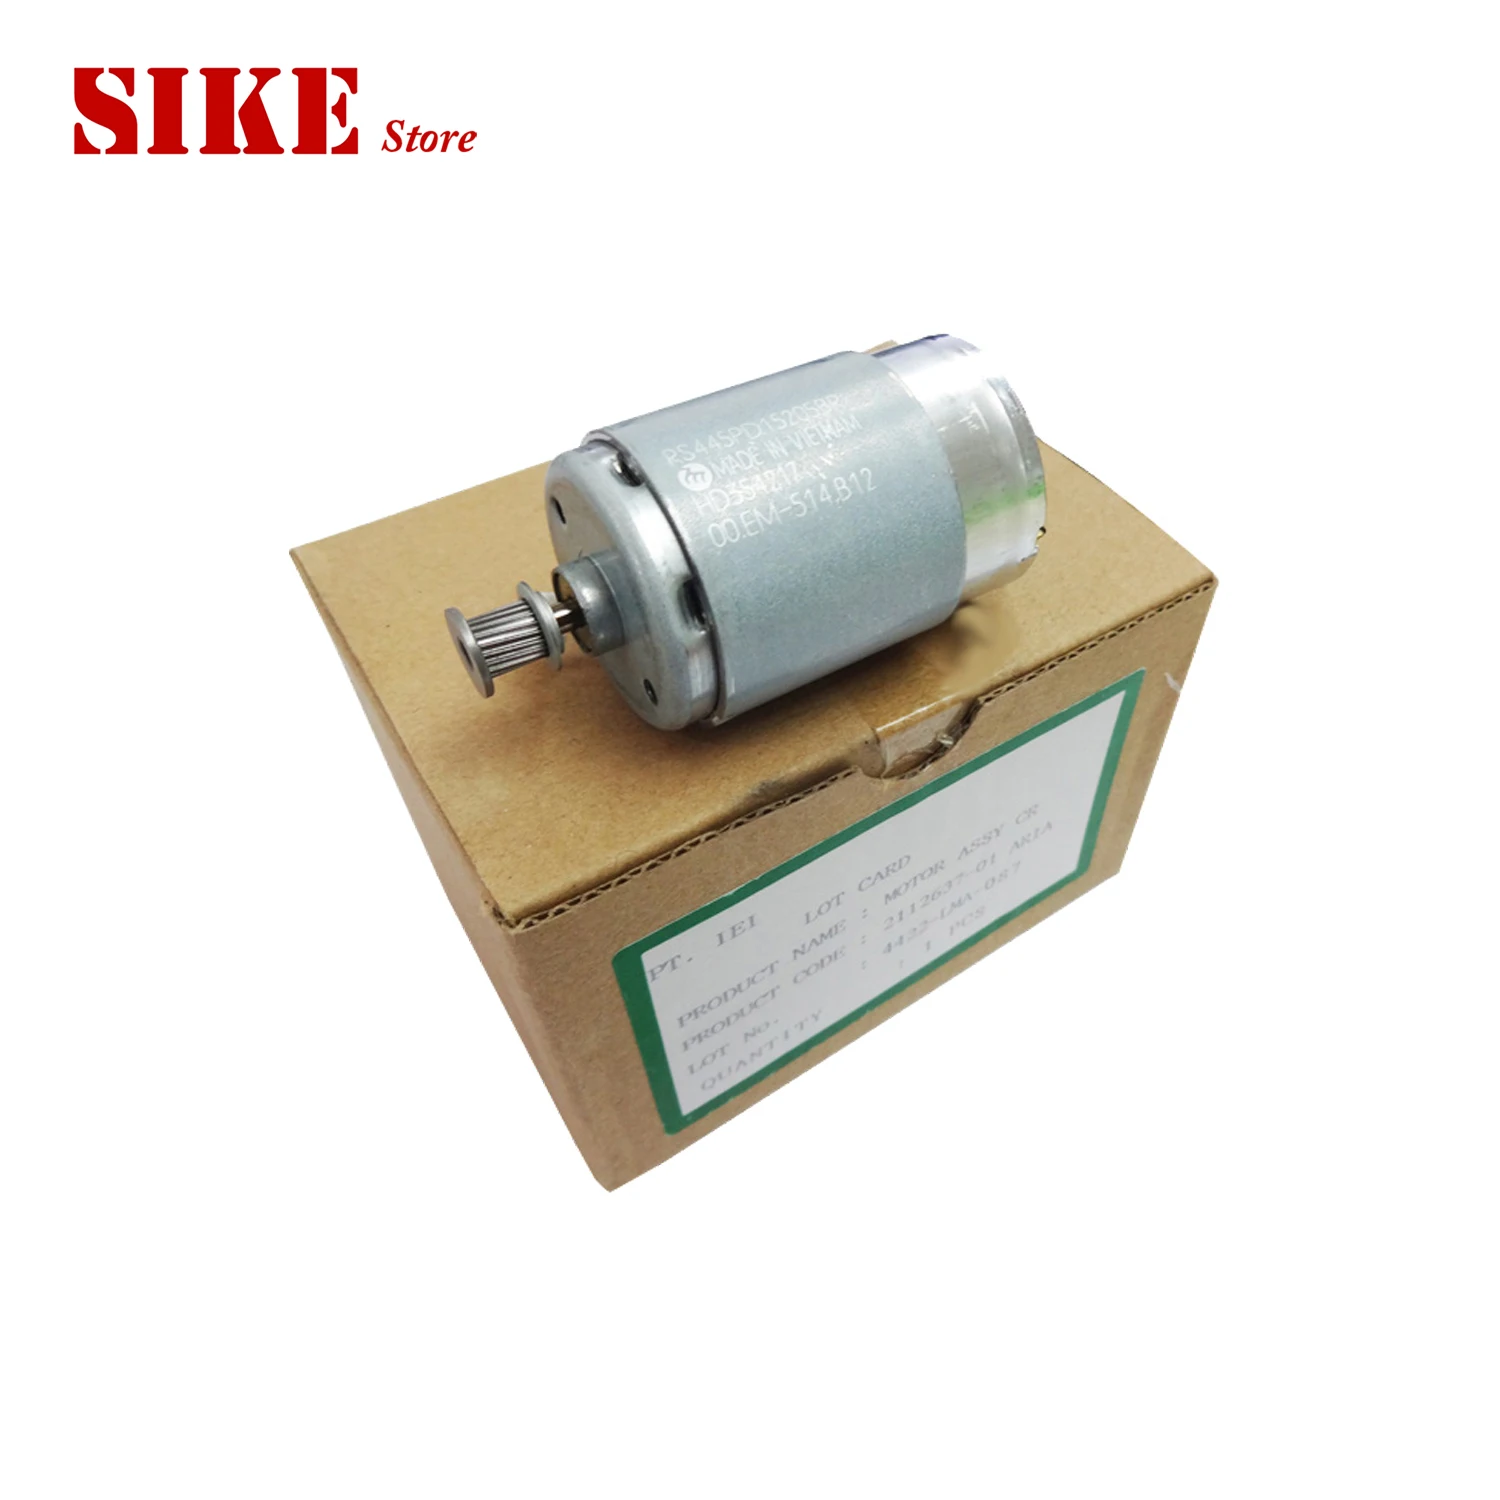 

New CR motor carriage motor for Epson L1800 1390 1400 1410 1430 1500W T1100 T1110 L1300 B1100 ME1100 printer